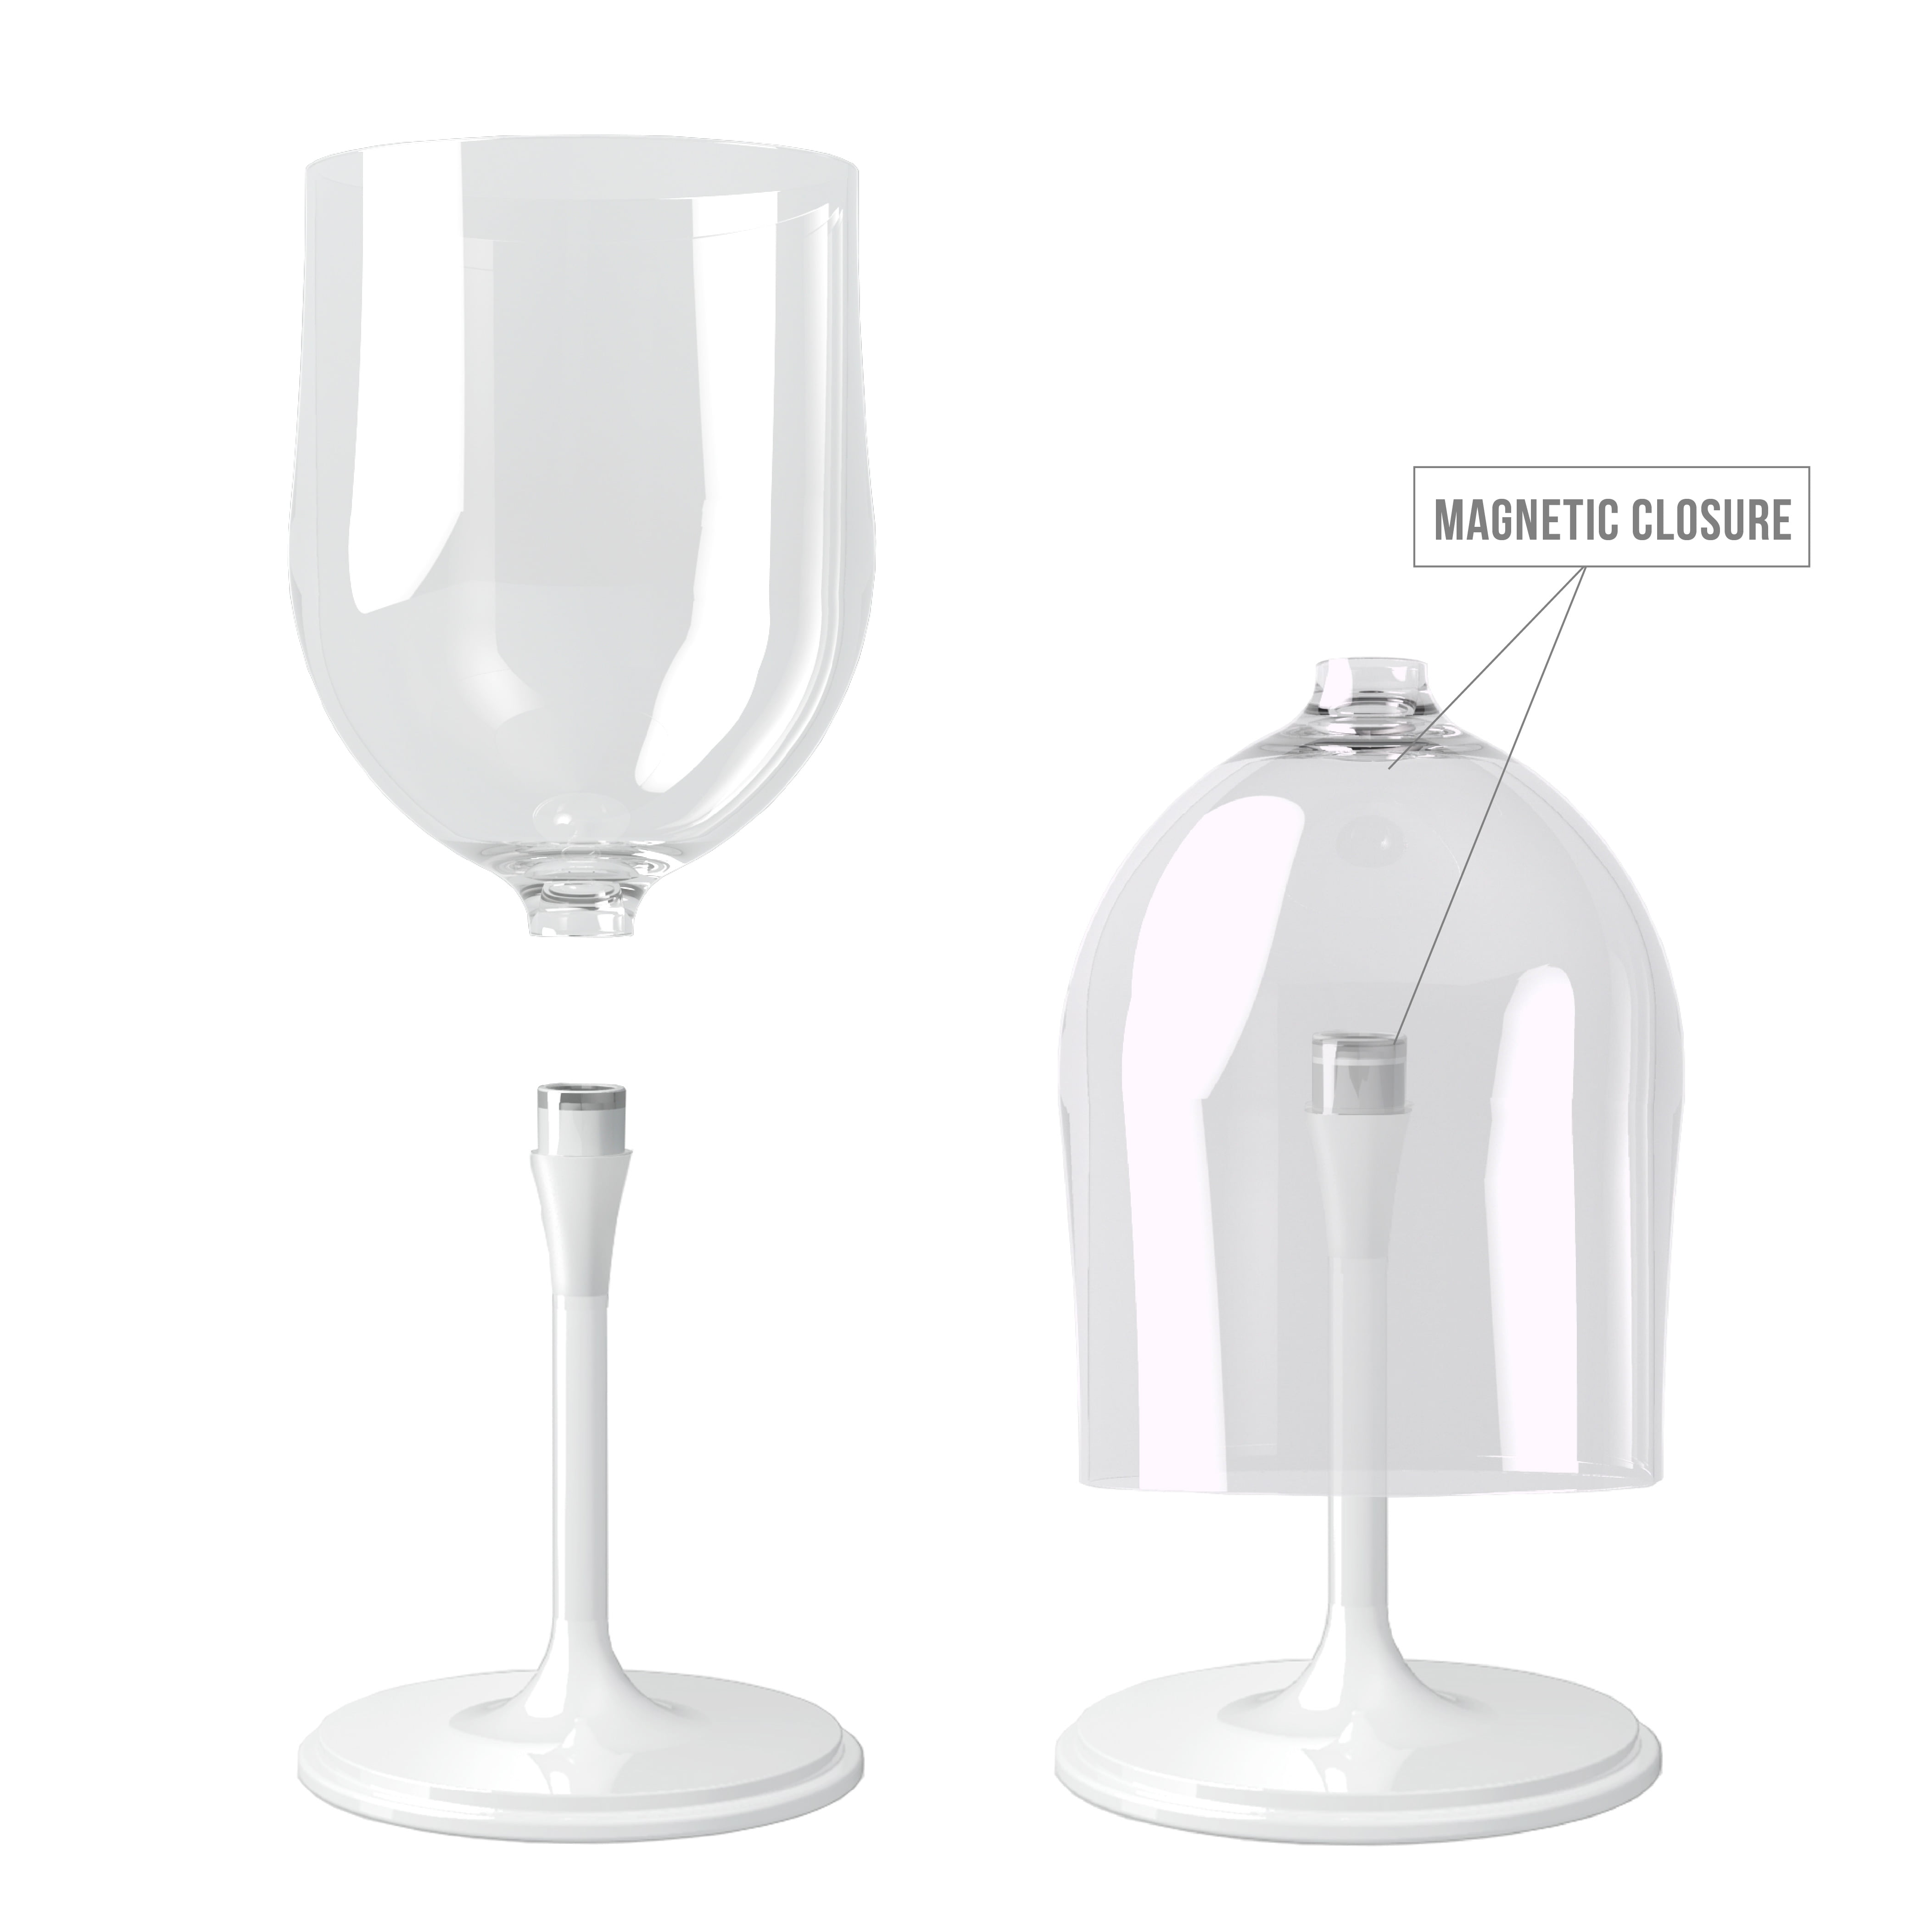 Portable Outdoor Wine Glass, LMents of Style